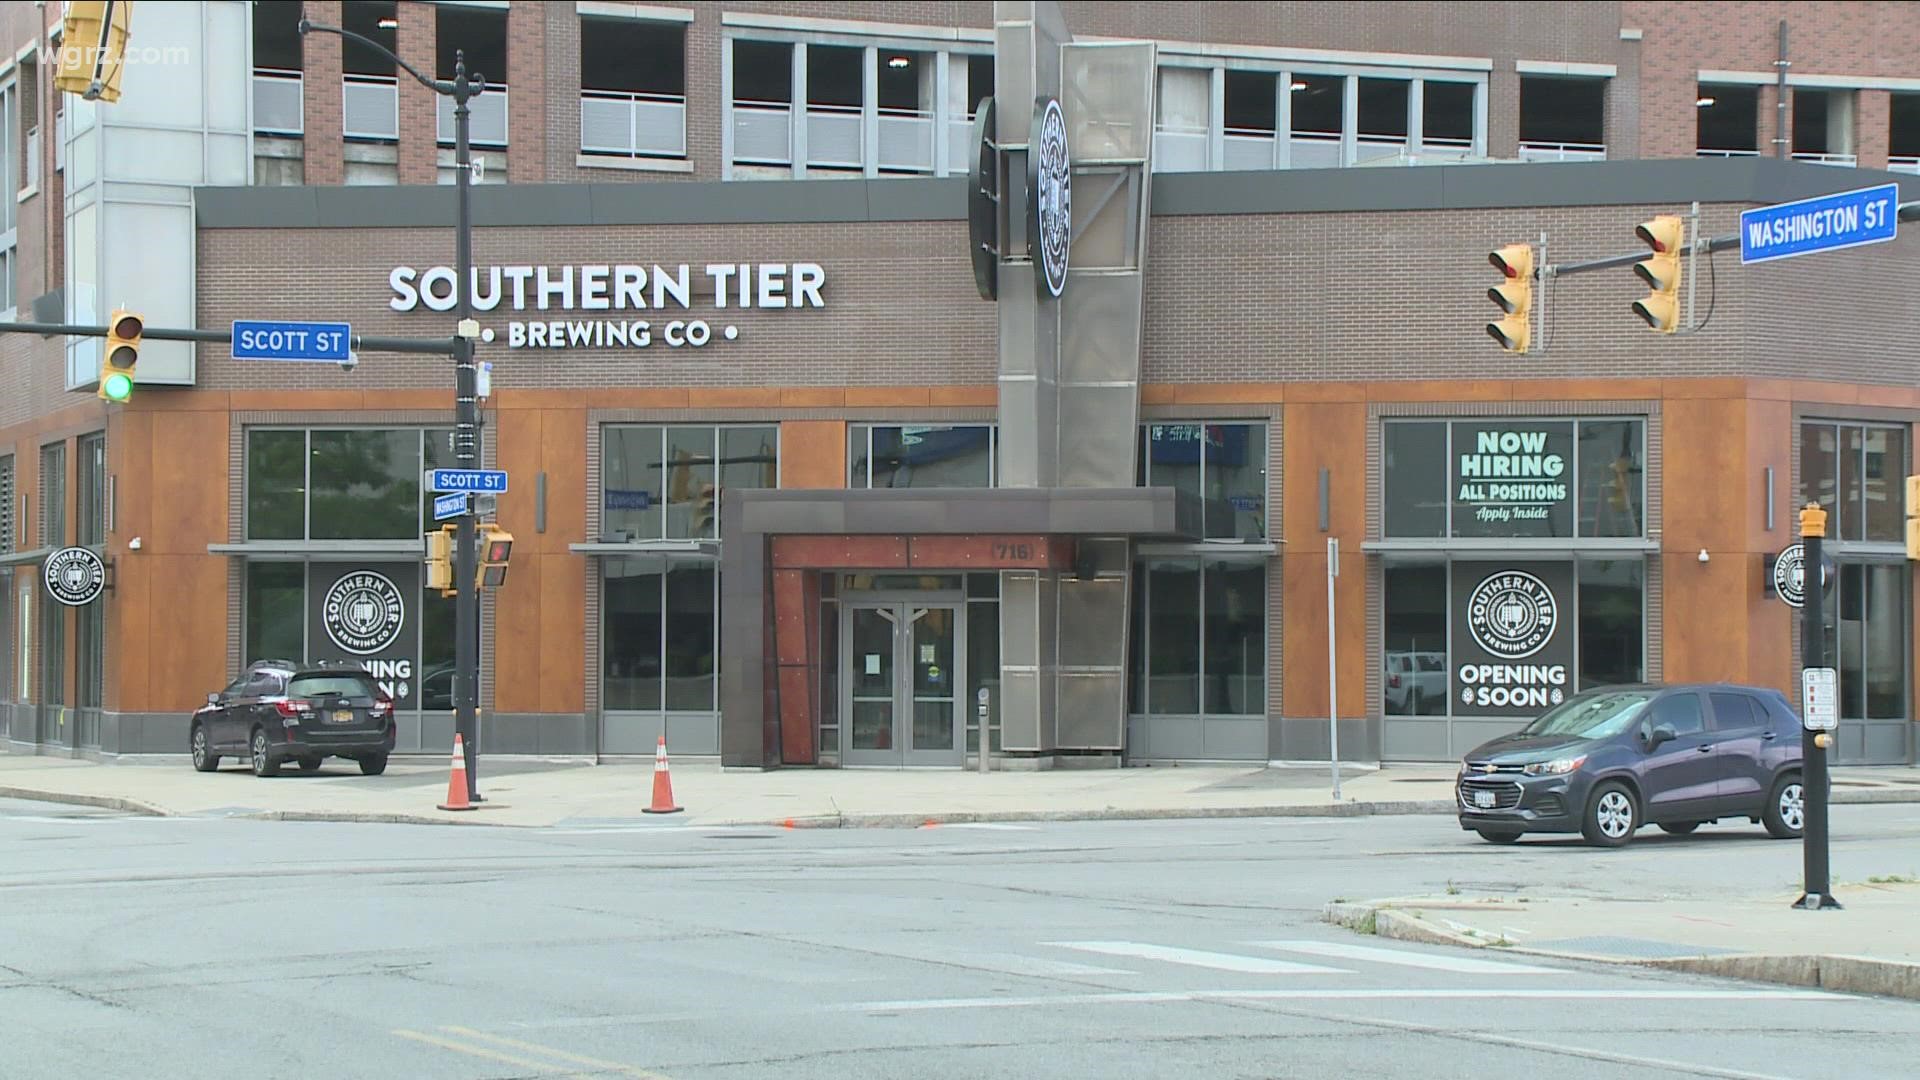 Southern Tier Buffalo taproom opens September 28th at 3:00pm